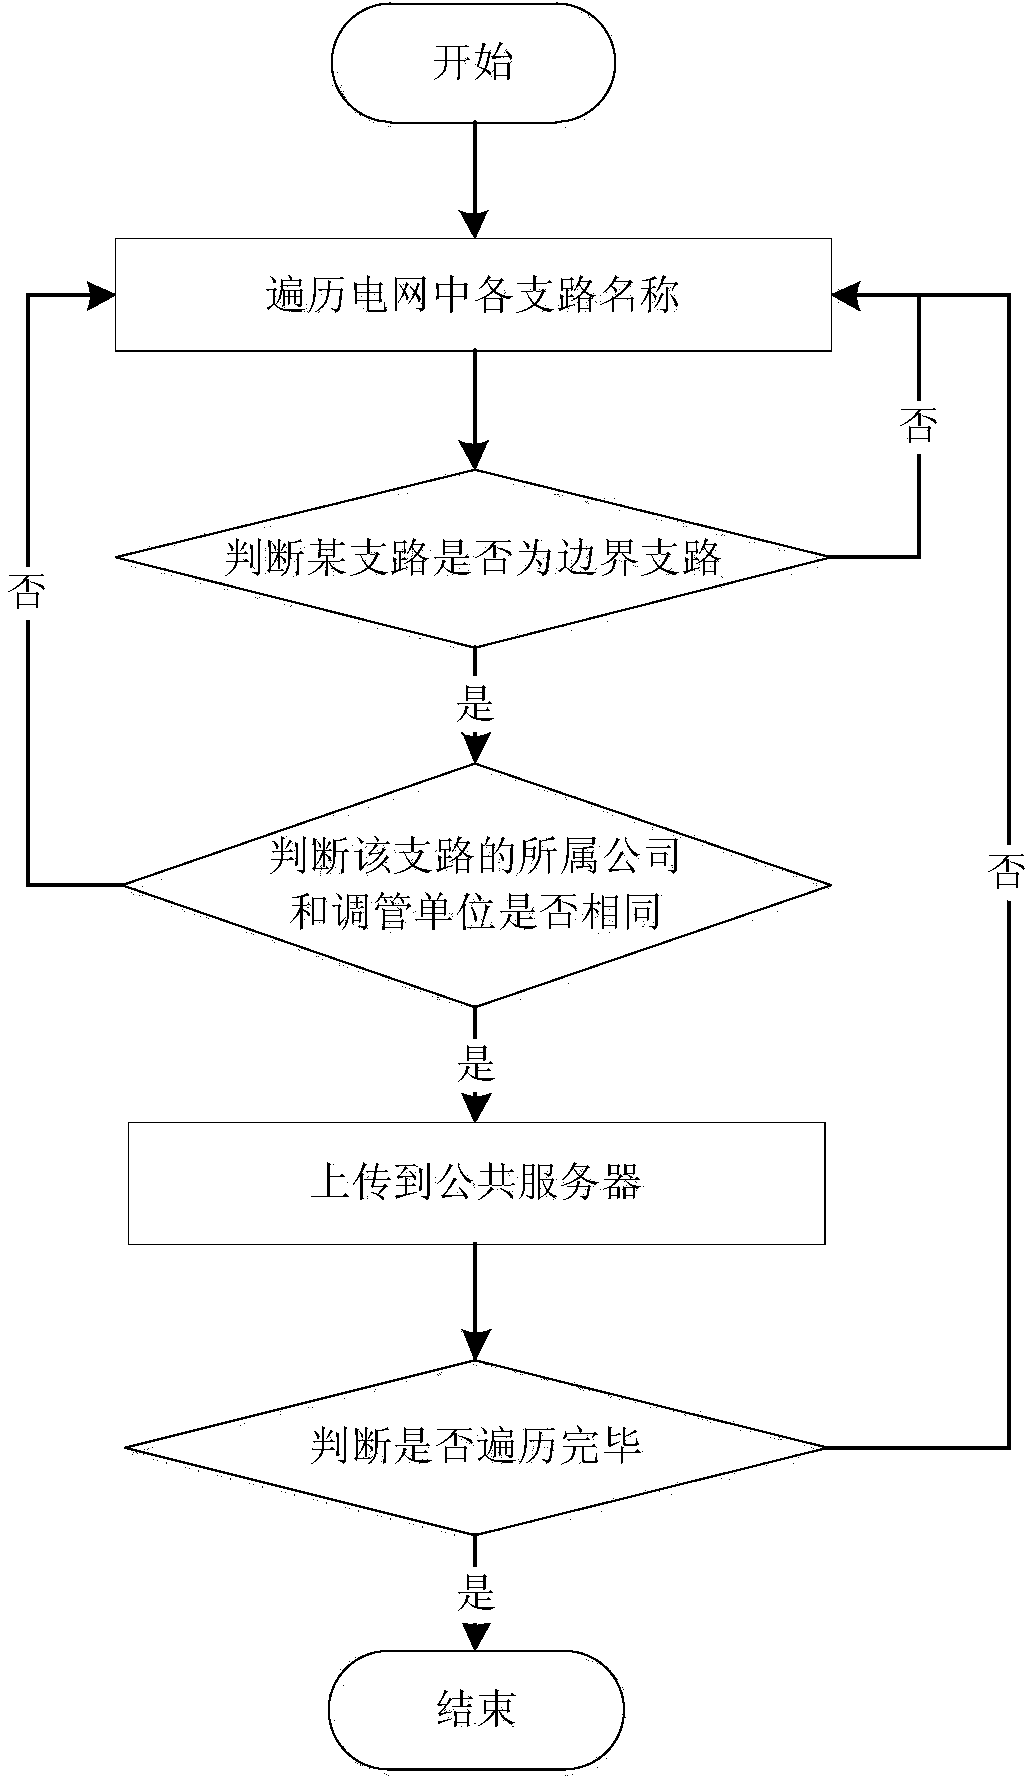 Processing method for distributed setting calculation models layered according to voltage levels